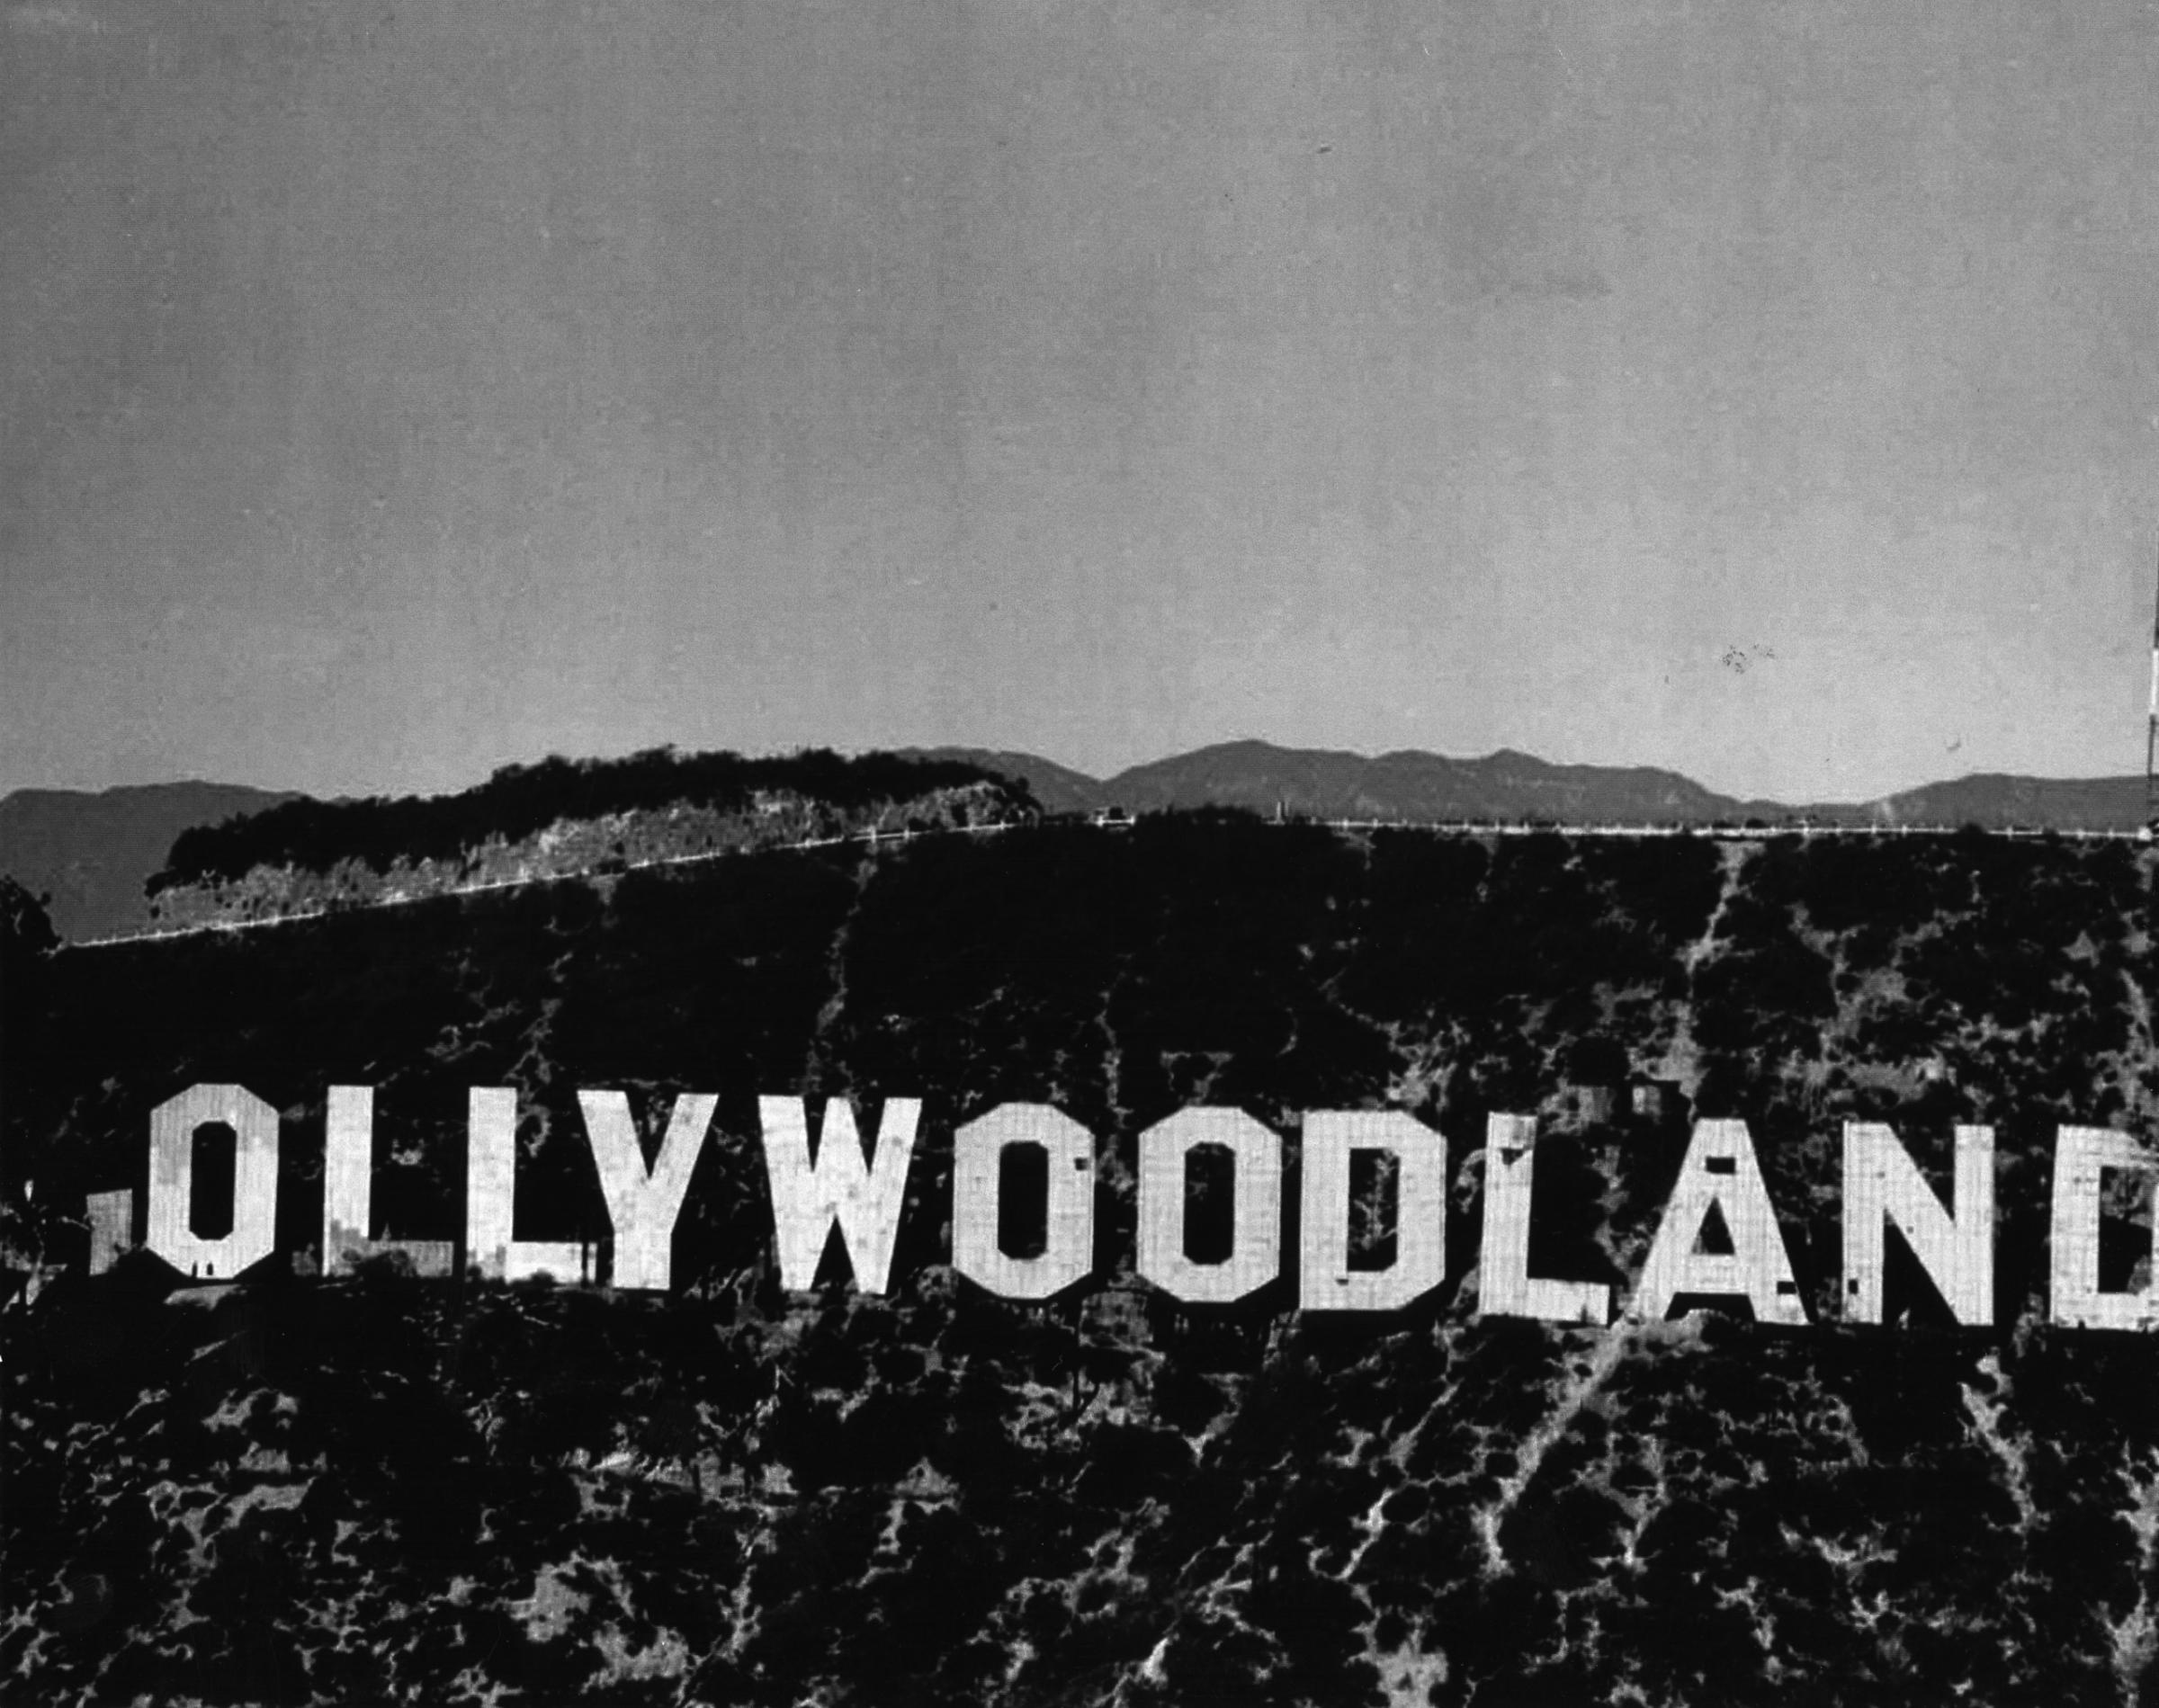 The "ollywoodland" sign, 1949.